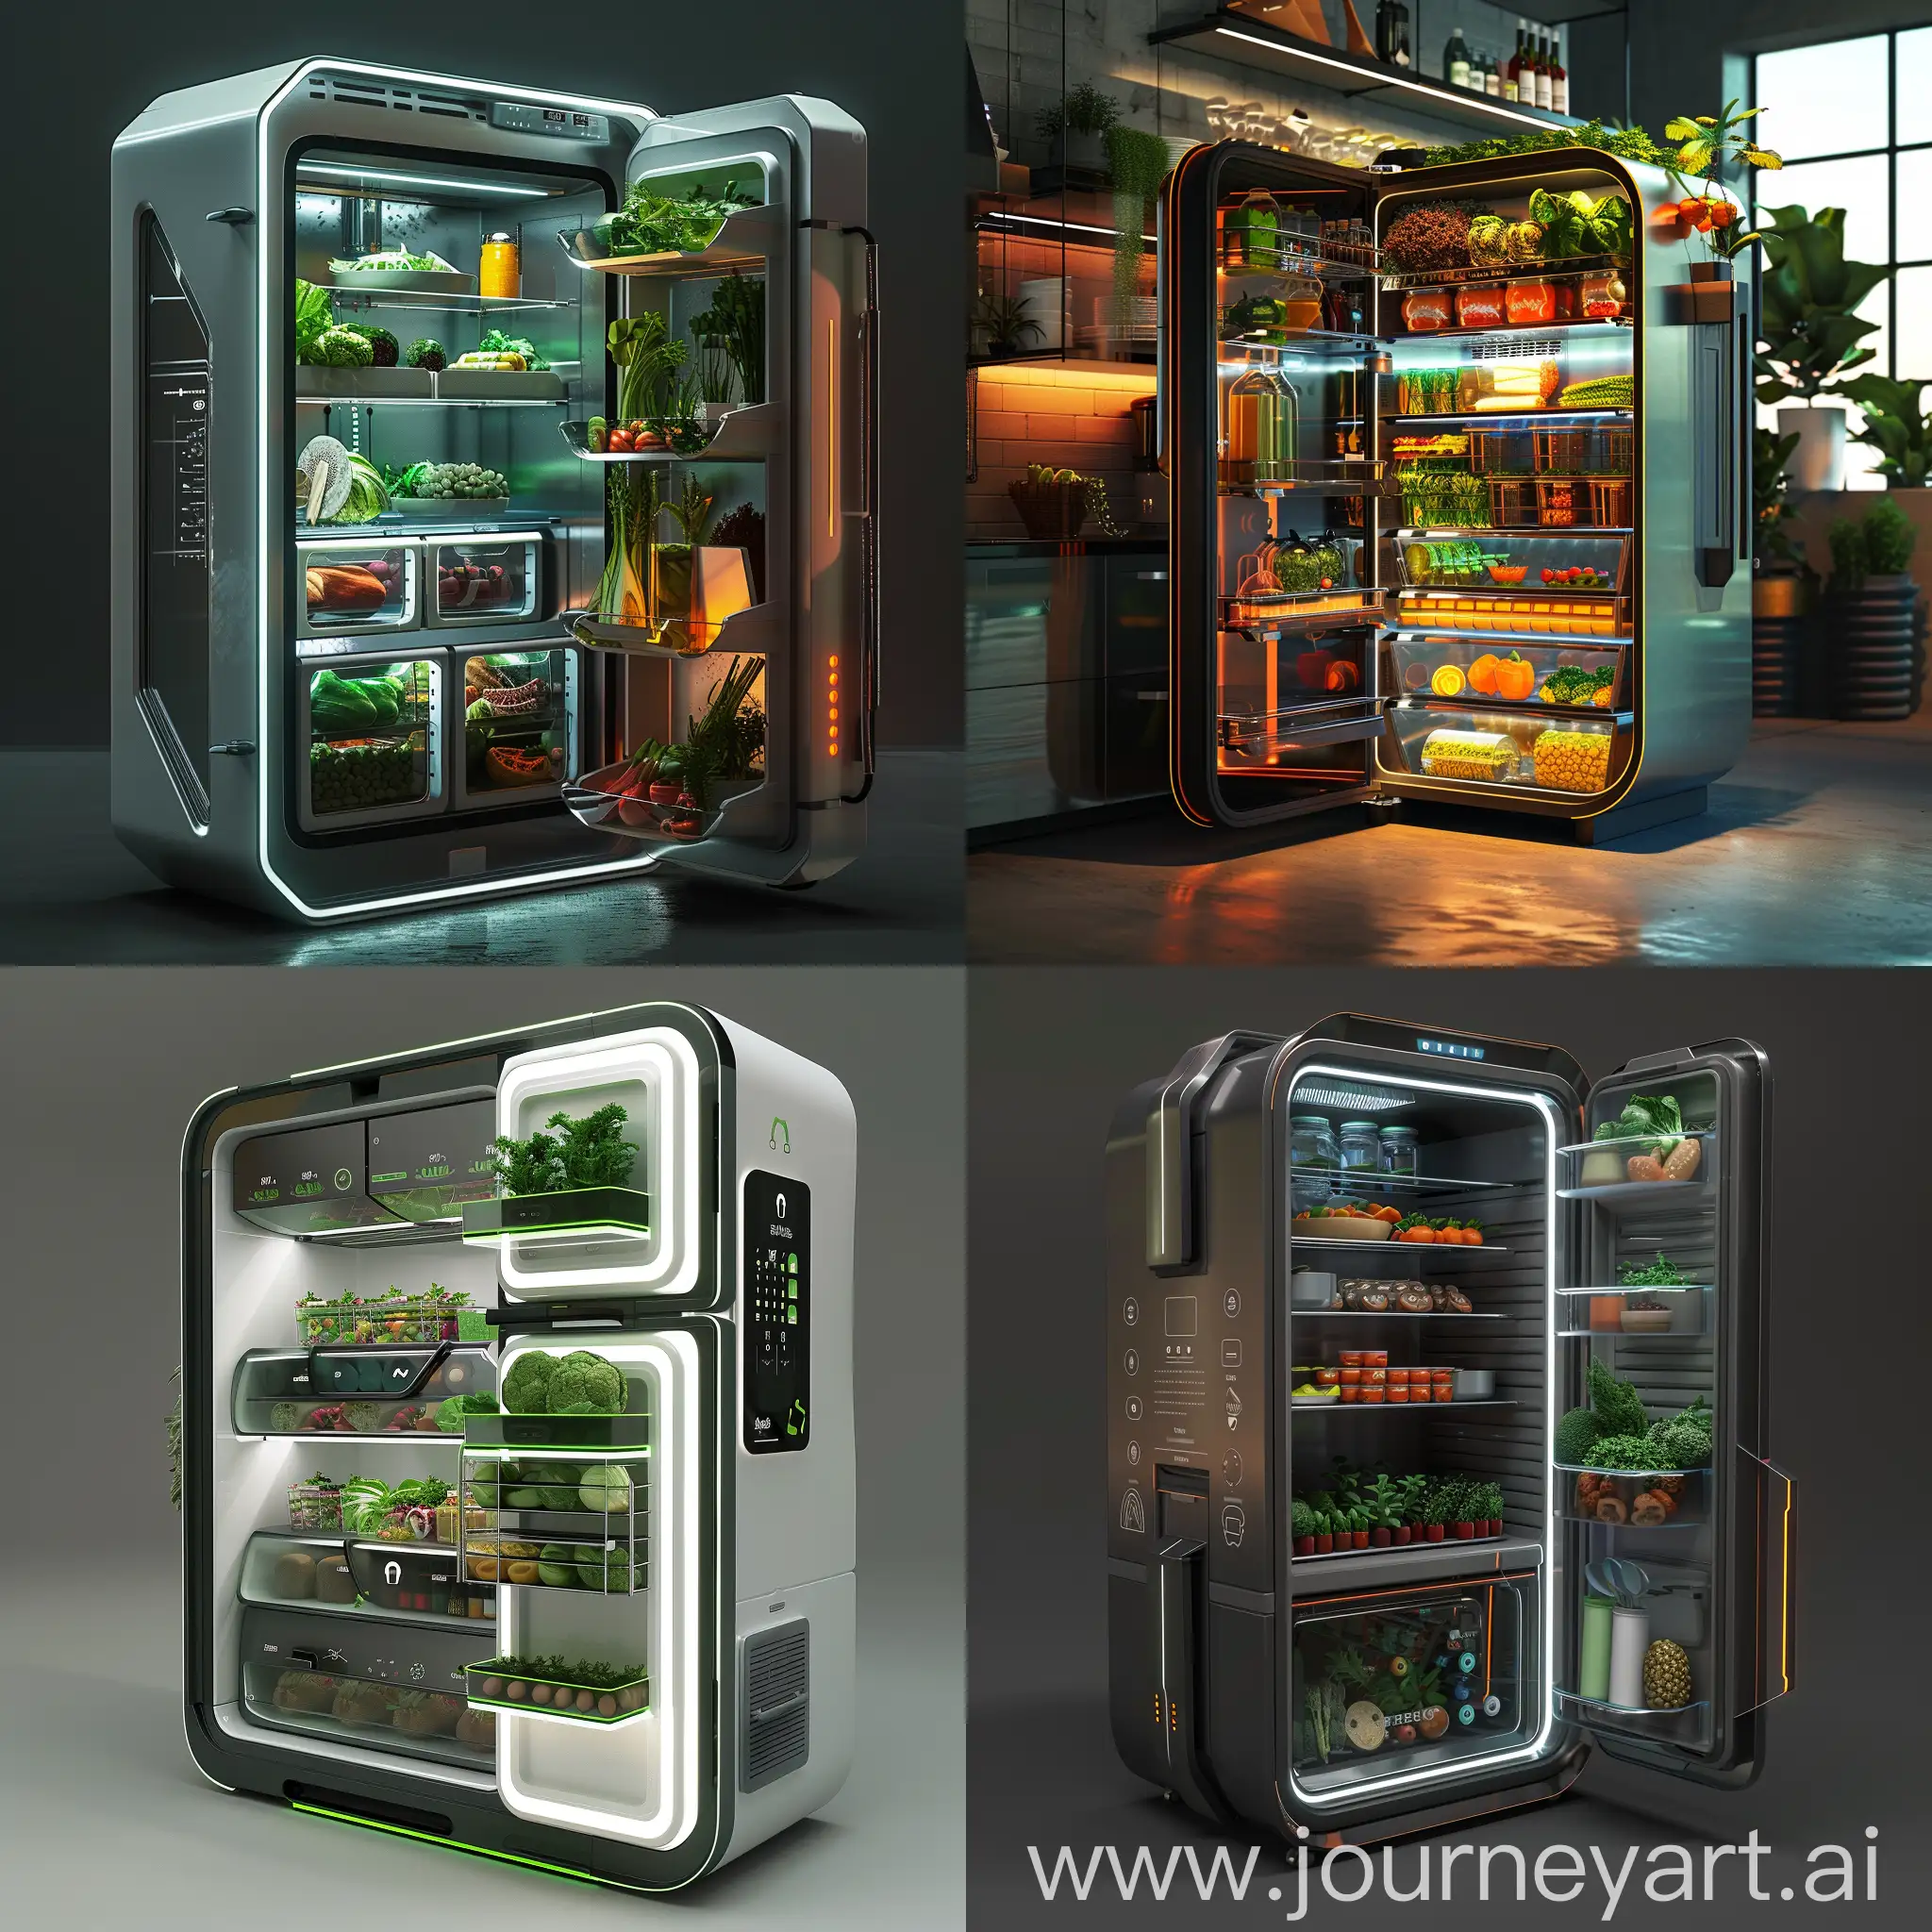 Futuristic fridge, Robotic Chef Assistant (AI & Robotics), Self-Inventory and Replenishment (IoT & Blockchain), Personalized Nutrition (Biotechnology & Gene Editing), Virtual Reality Meal Planning (VR), Augmented Reality Food Labeling (AR), Nano-Preservation (Advanced Materials Science), Vertical Farming Integration (Biotechnology & IoT), Waste Composting Unit (Biotechnology), Energy Efficient Design (Advanced Materials Science), Self-Cleaning Surfaces (Advanced Materials Science), Kinetic Display (AI & Advanced Materials Science), Voice Control Interface (AI), Modular Design (Advanced Materials Science), Transparent or Tinted Glass Doors (Advanced Materials Science), Organic LED Lighting (Advanced Materials Science), Recycled or Biodegradable Materials (Sustainability & Advanced Materials Science), 3D Printed Accents (3D Printing), Interactive Recipe Projection (VR & AR), Social Media Integration (IoT), "Living" Fridge Exterior (Biotechnology & Advanced Materials Science), in unreal engine 5 style --stylize 1000